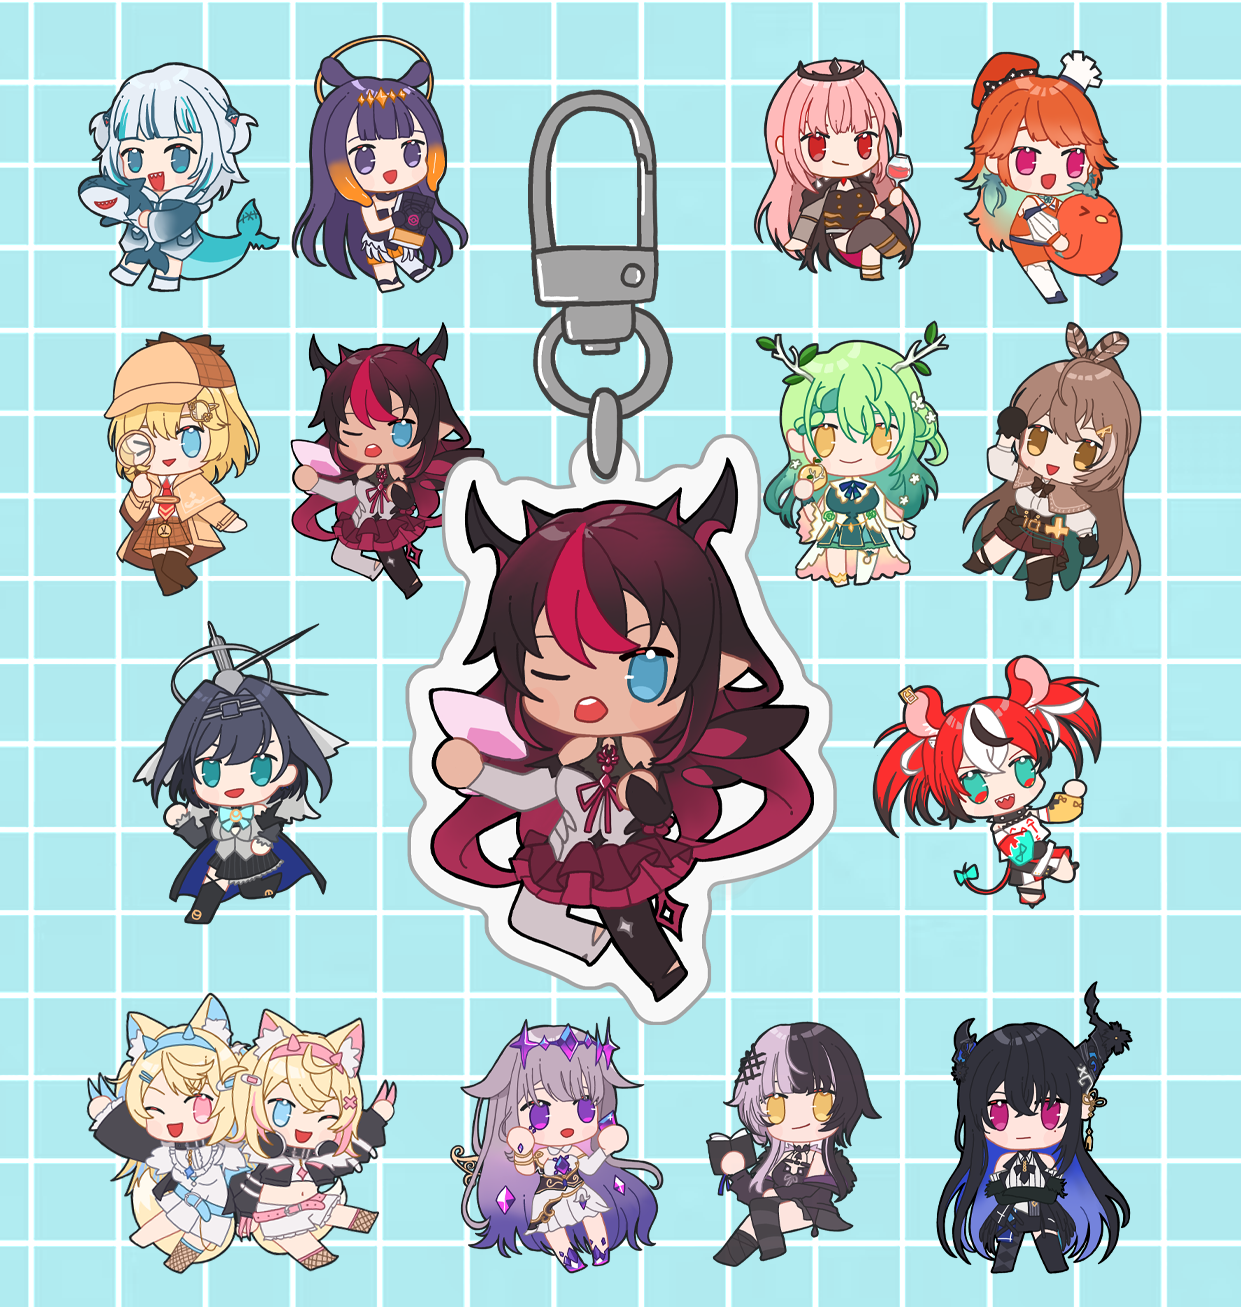 [PREORDER] Hololive EN Phone Charms